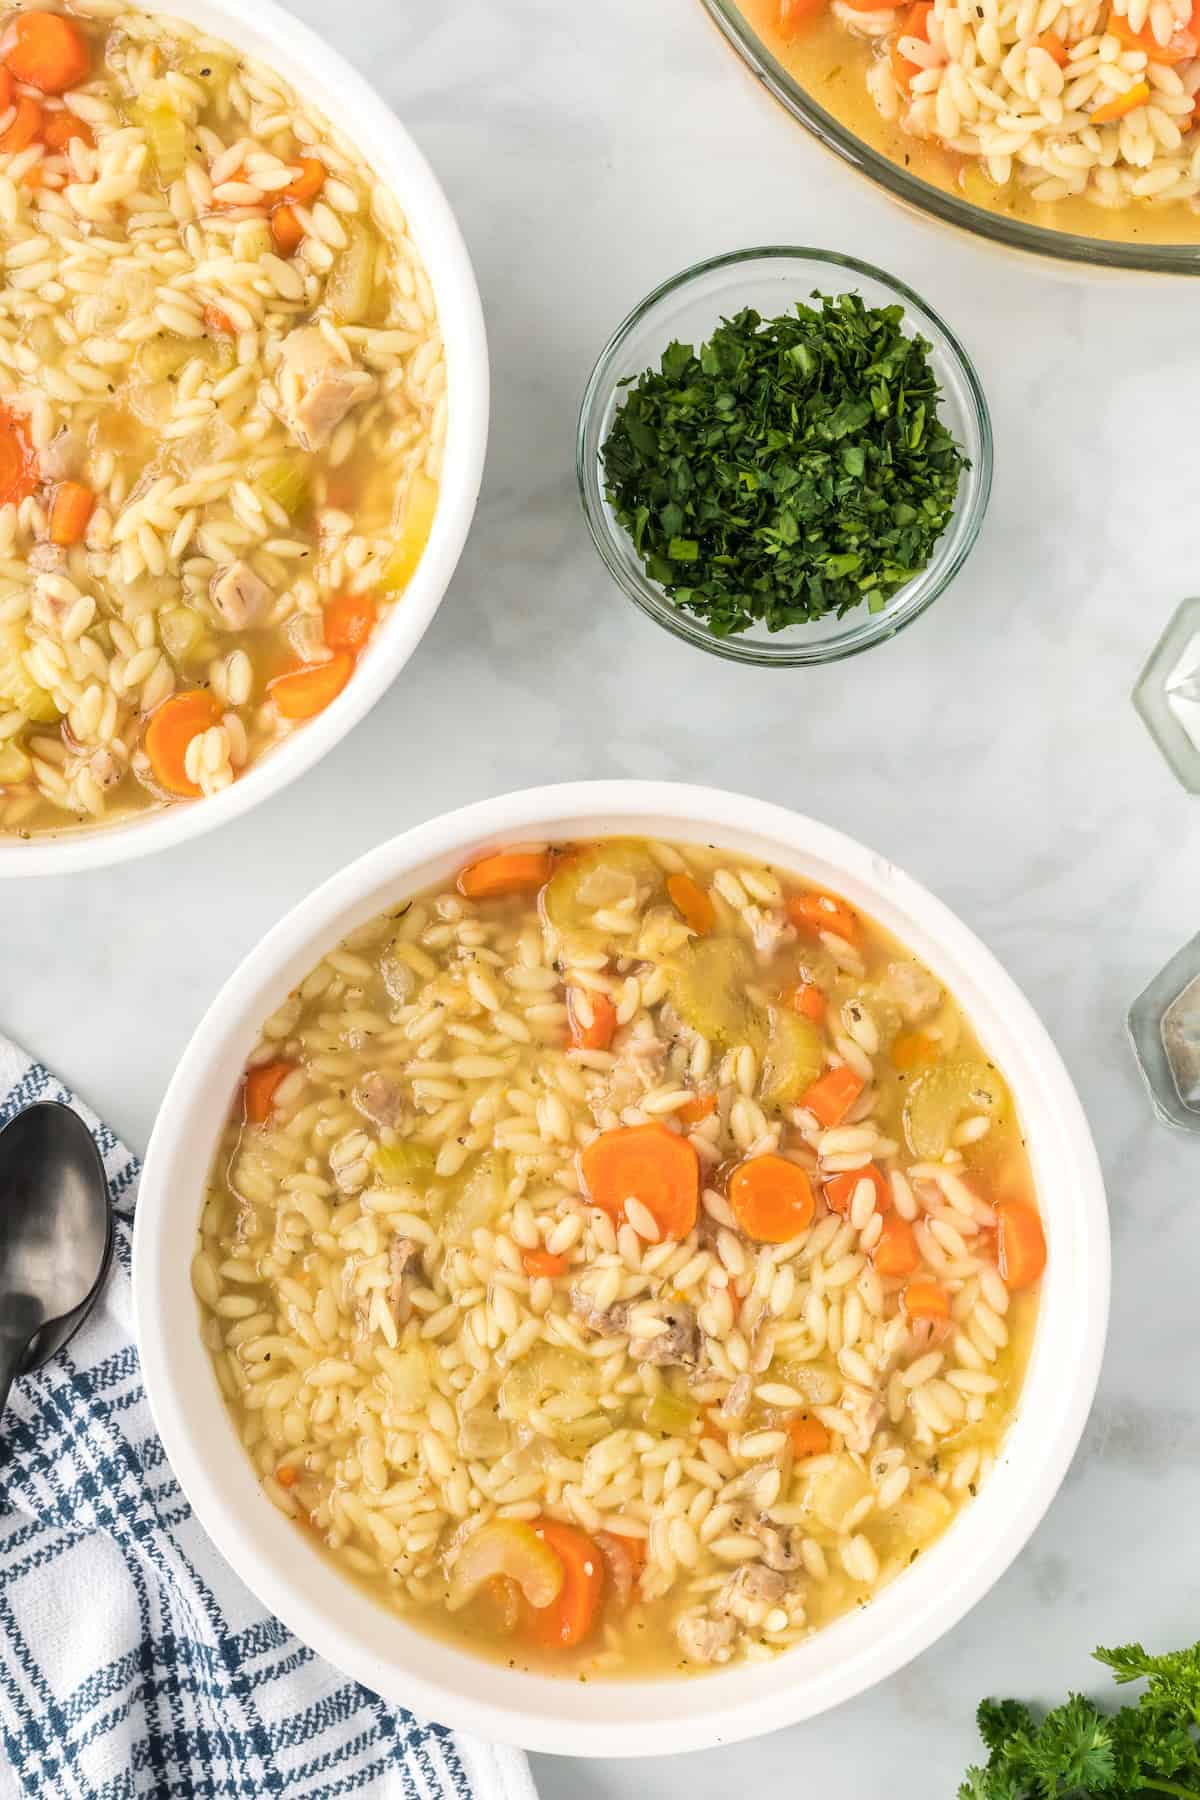 Ninja Foodi chicken soup with orzo pasta in white bowls